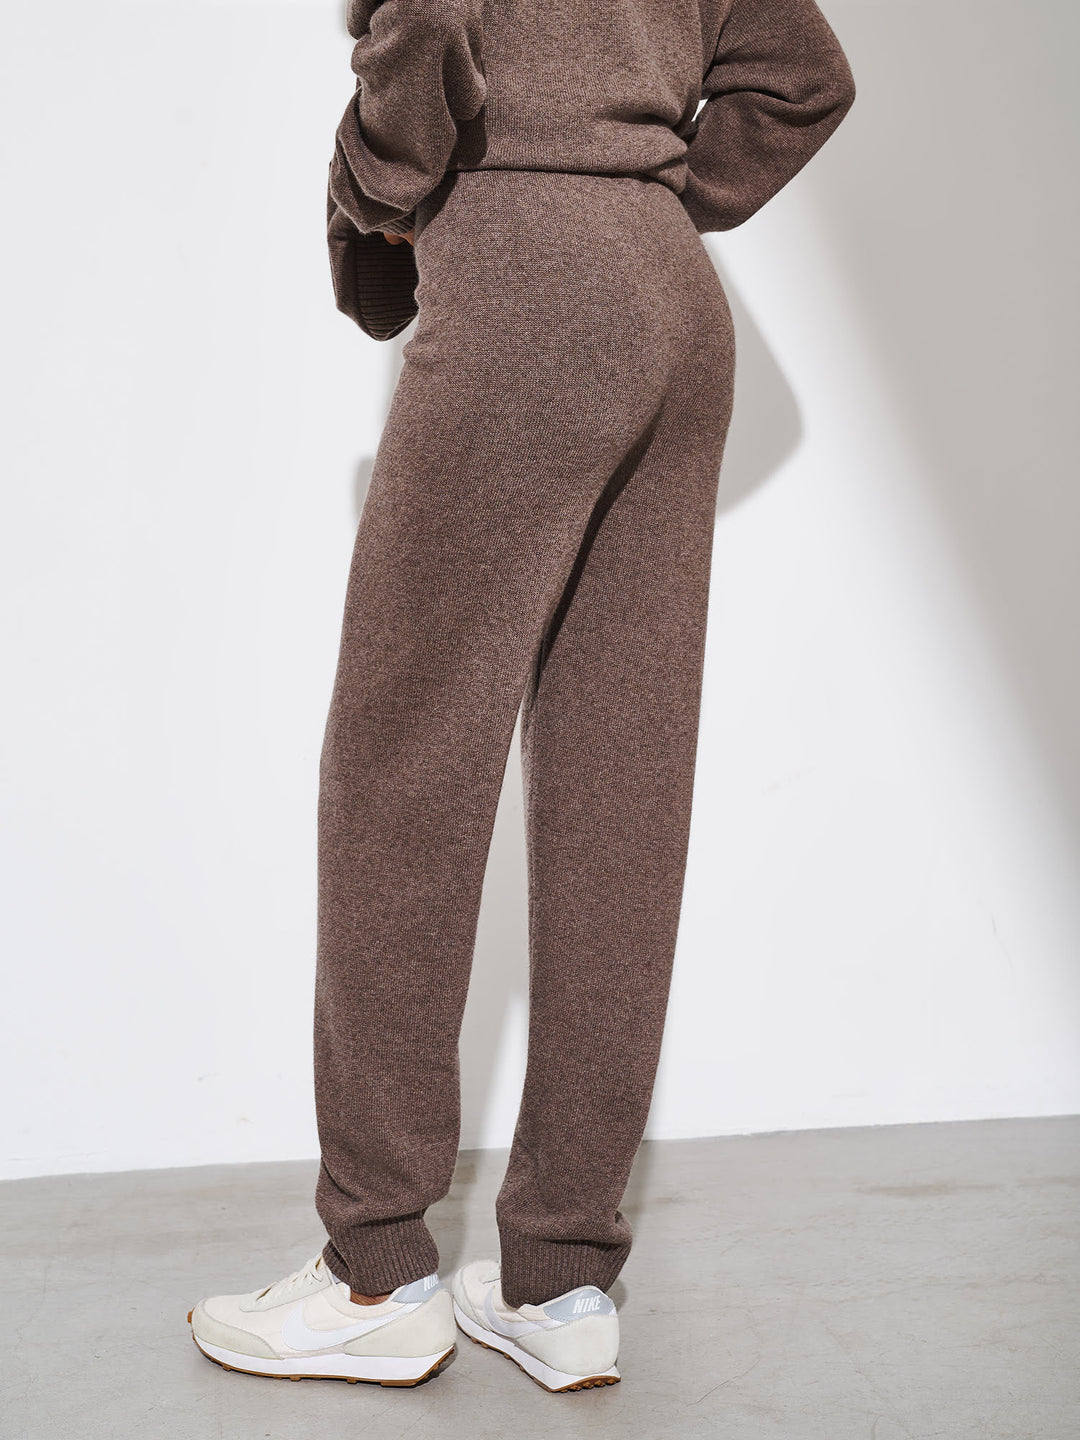 California cashmere blend pants (coffee)